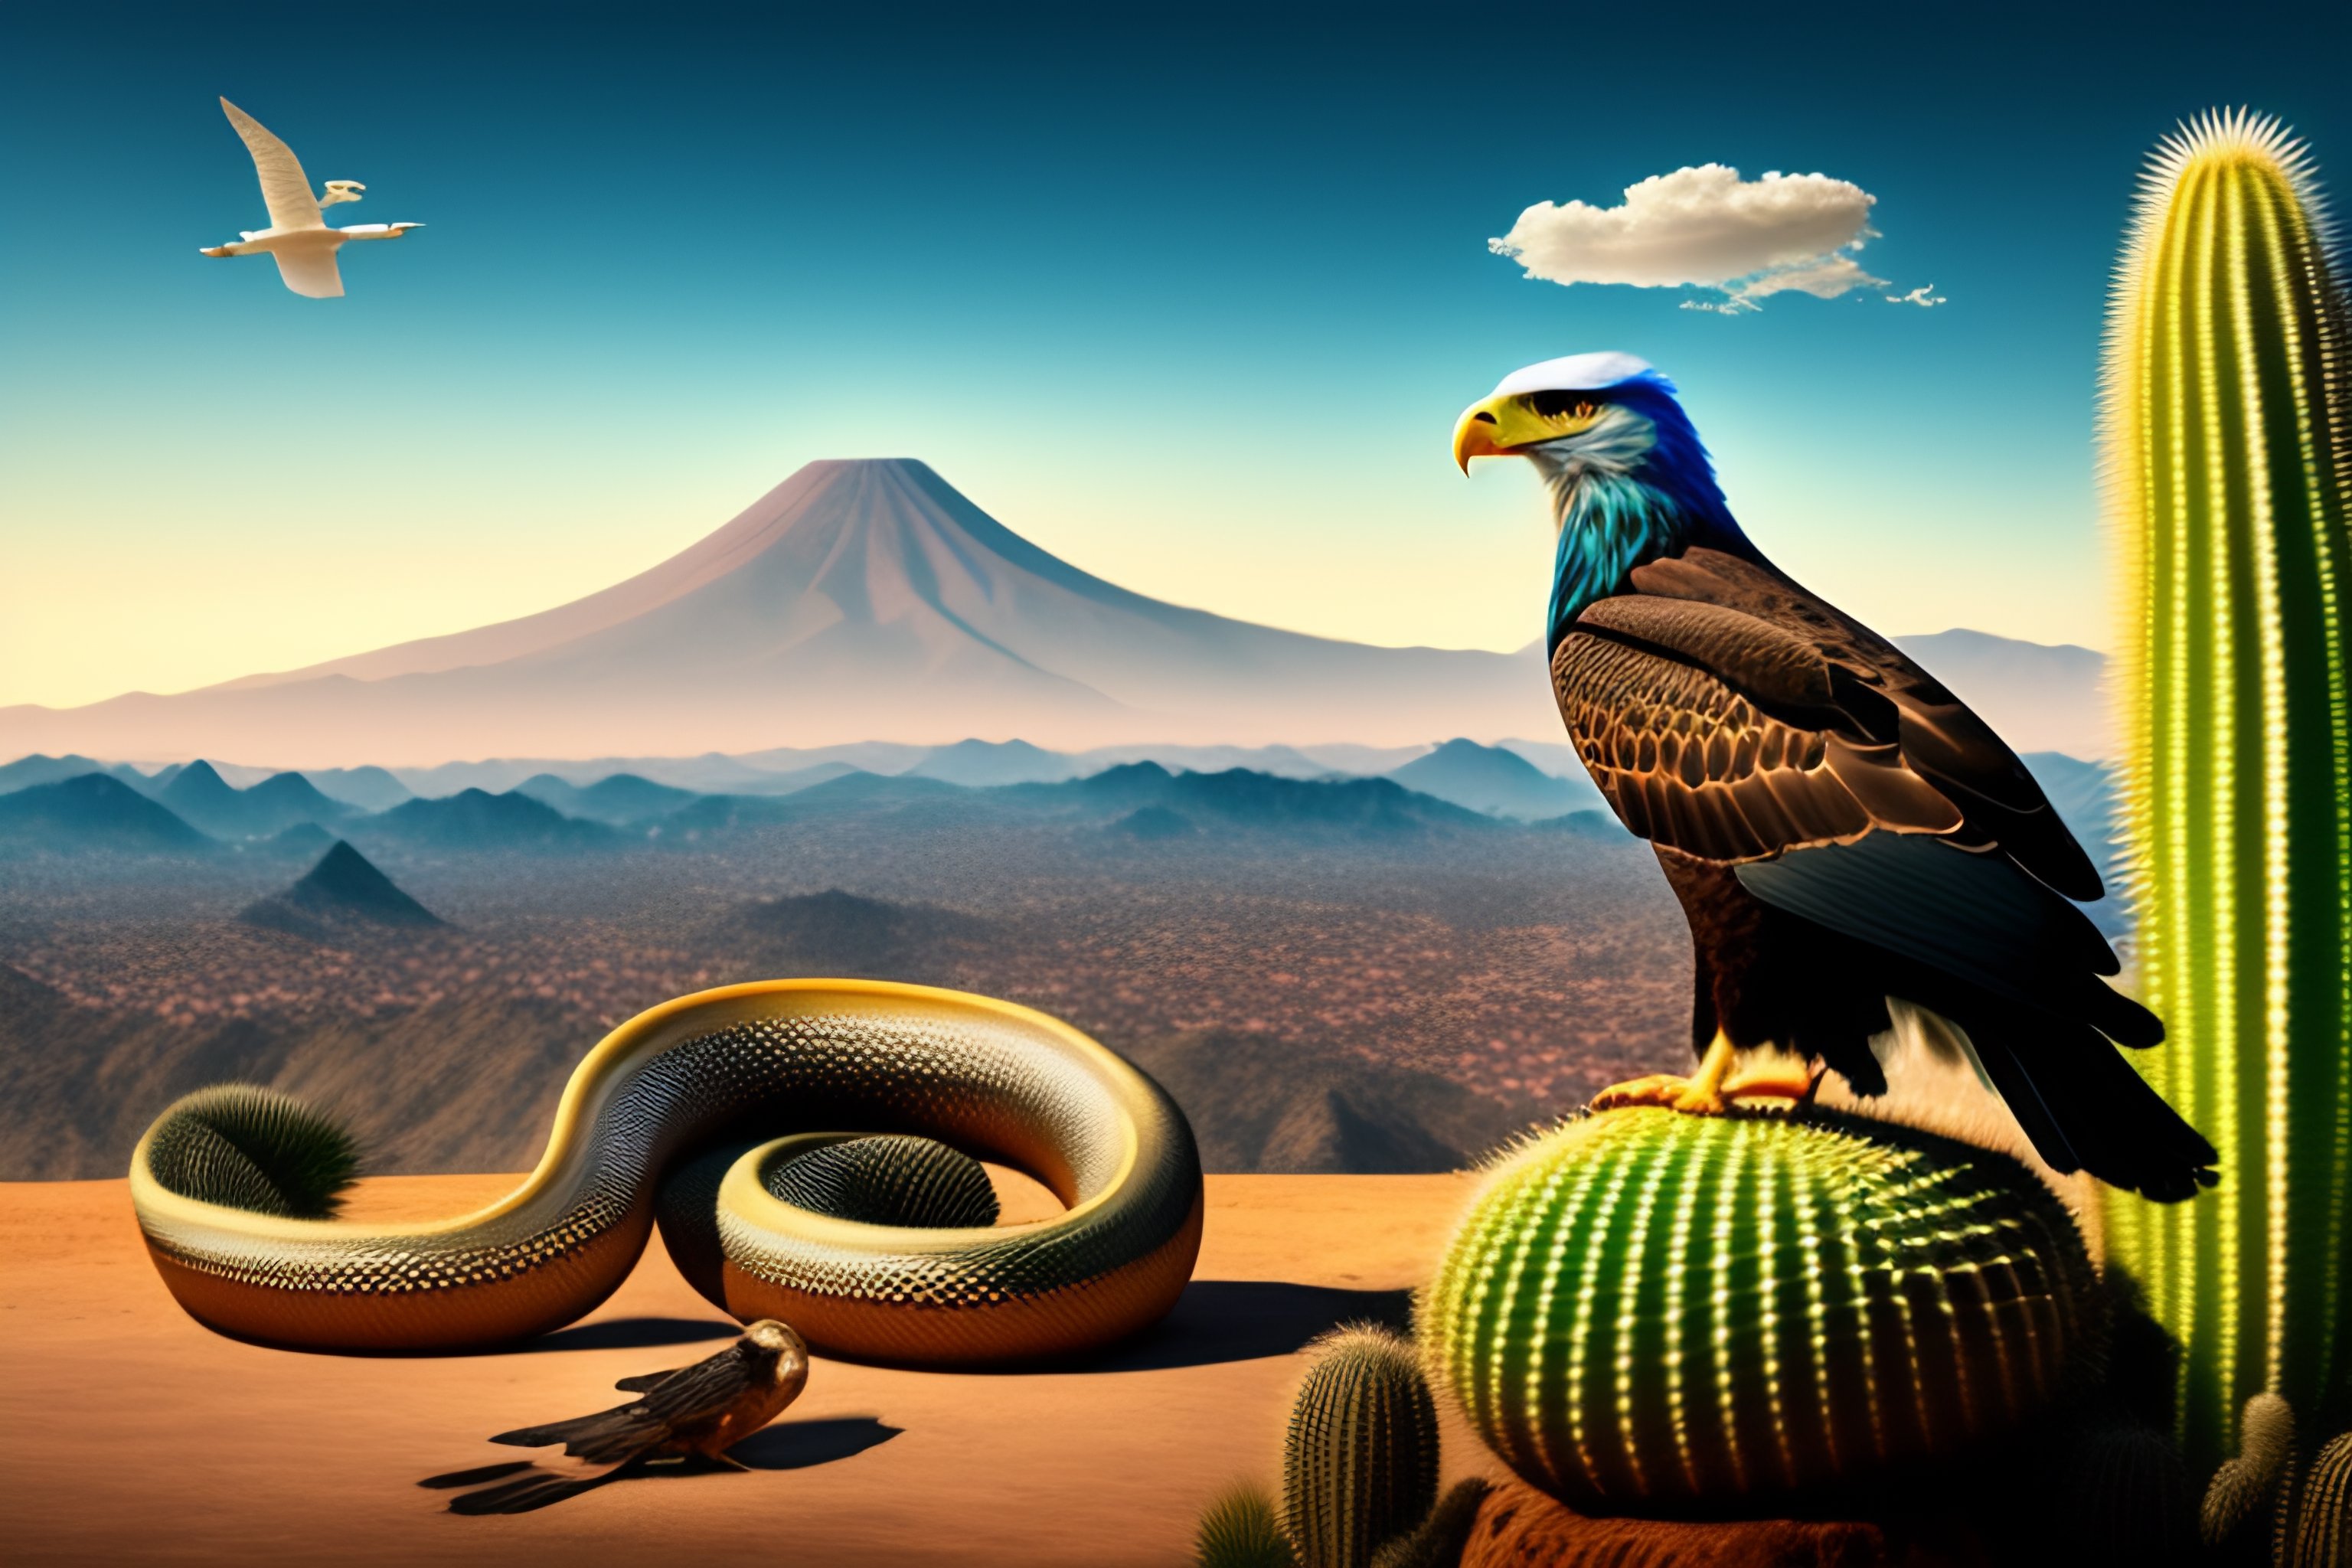 Lexica - Eagle eats snake under a cactus. in the background there is ...